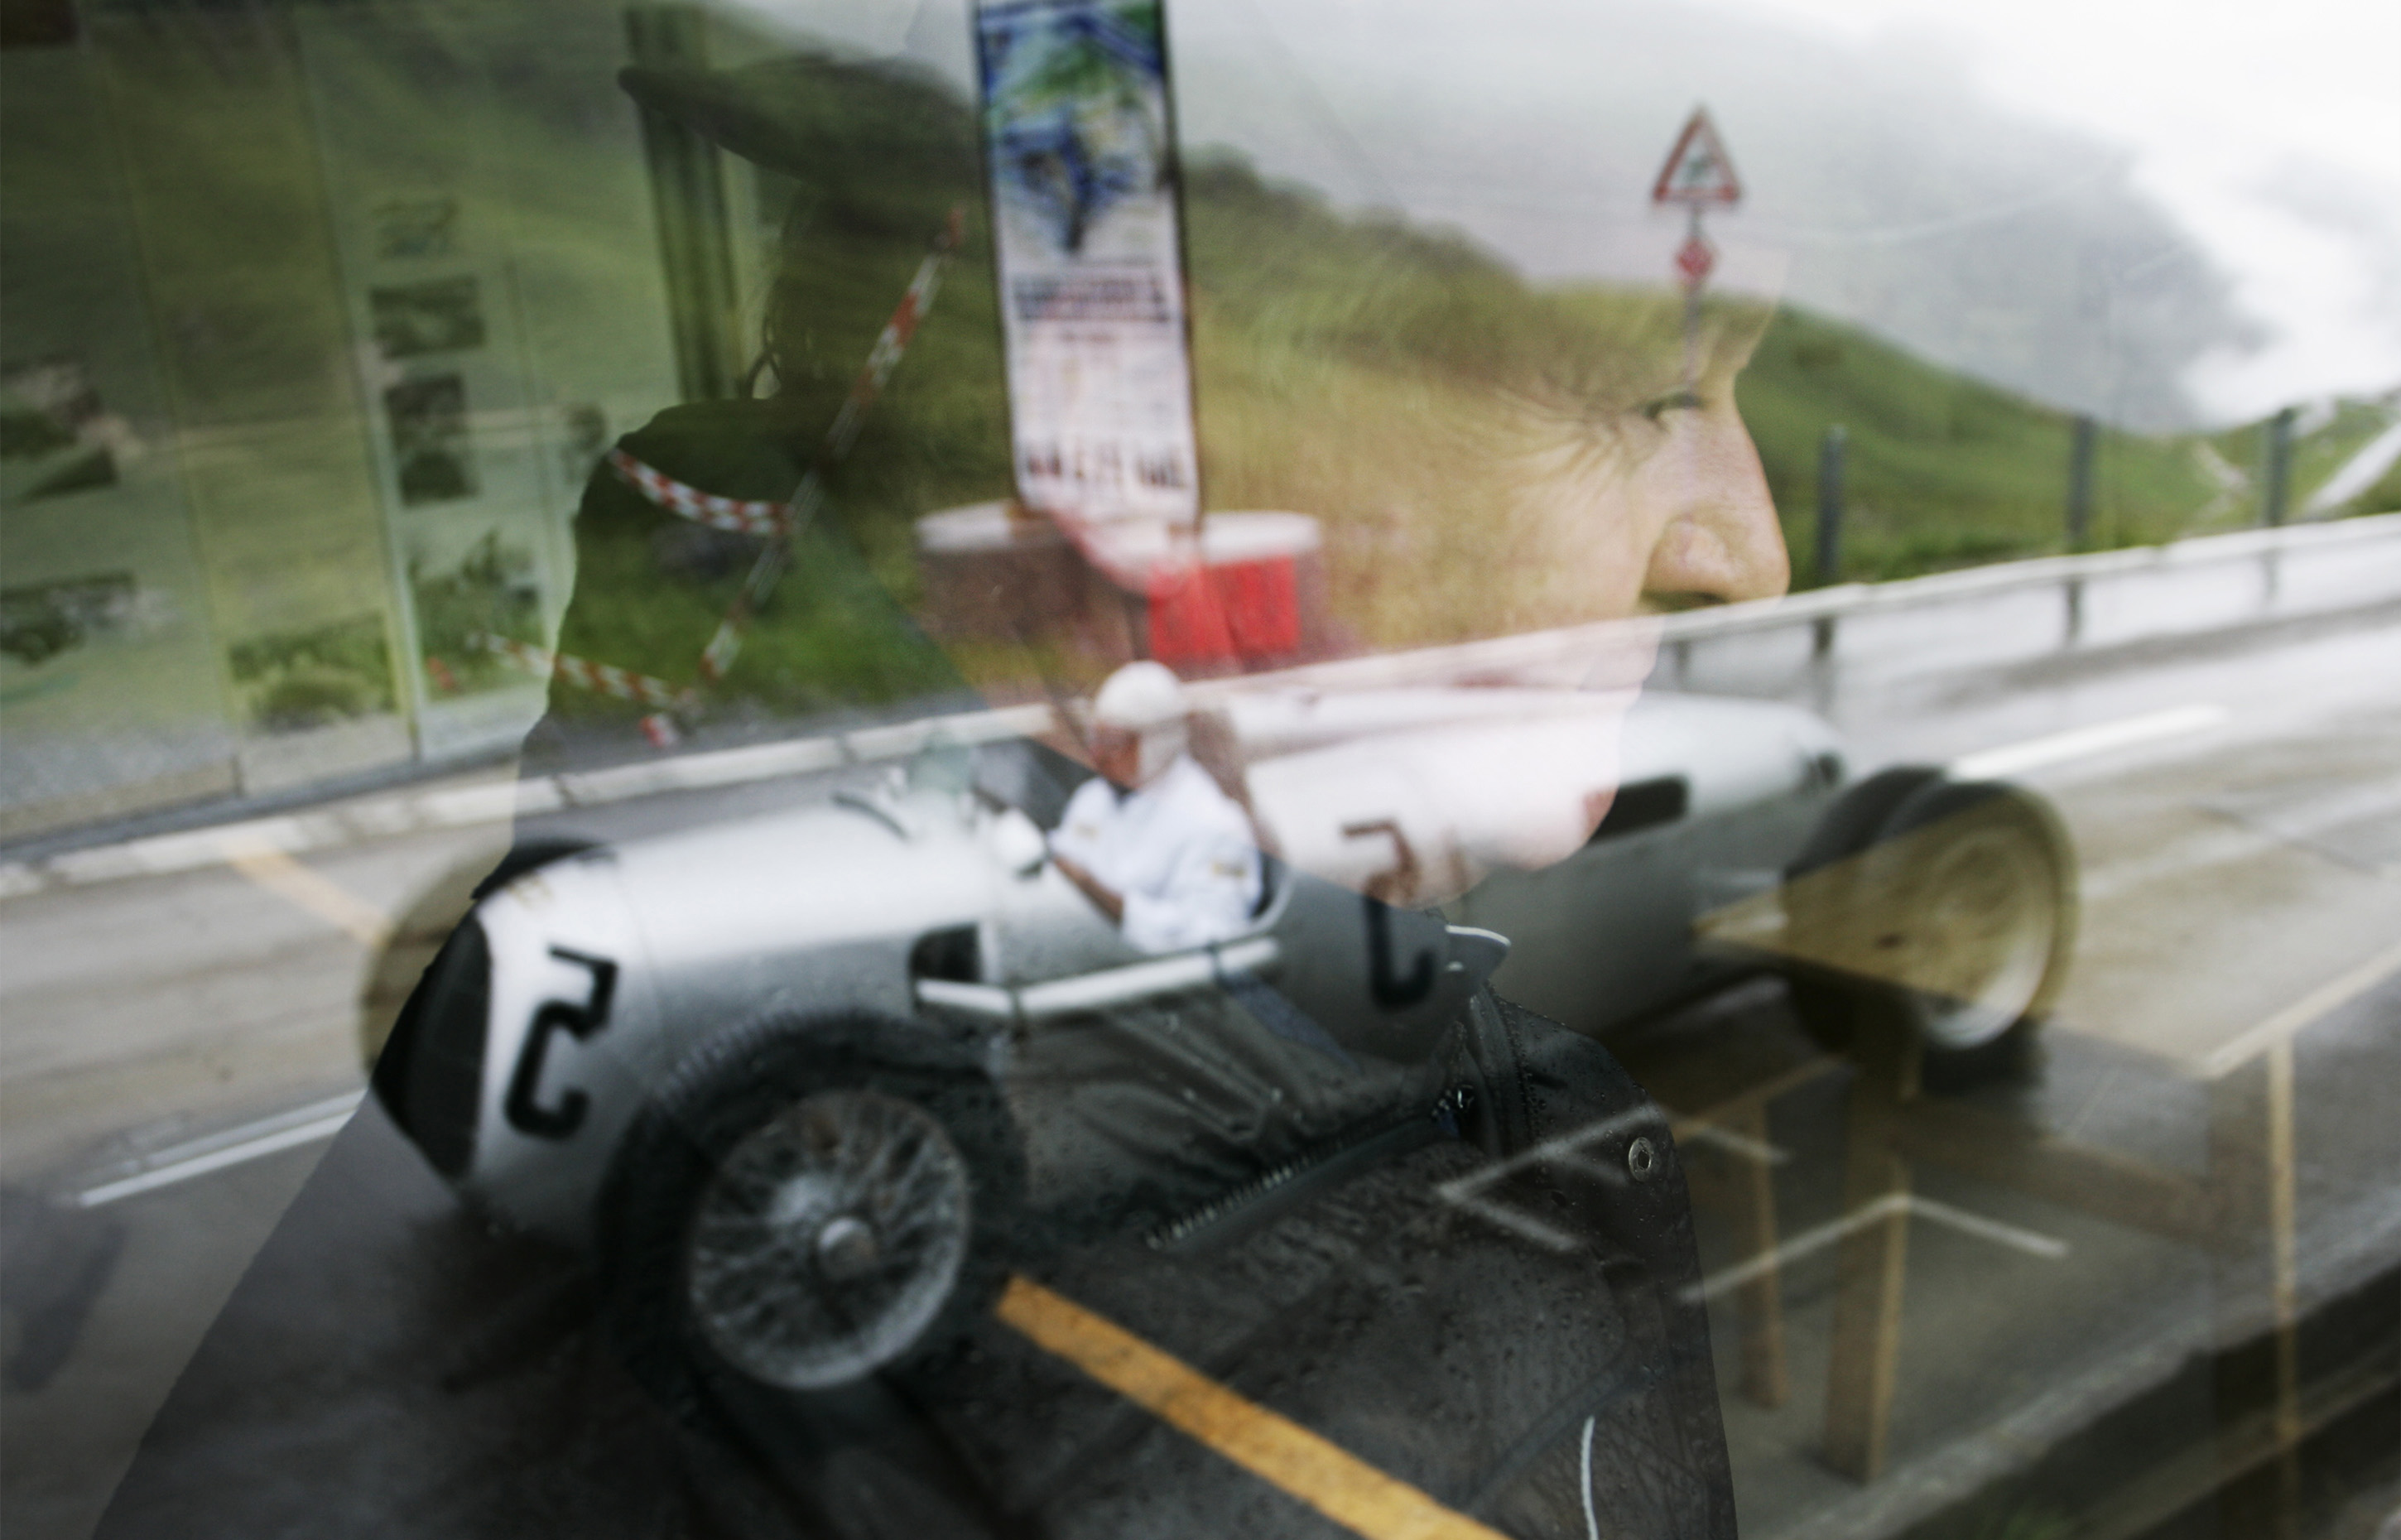 Klausen Pass, Switzerland - Classic 1937 Auto Union C-type races the Klausen Pass, Switzerland. The best racers in the world came together every year from 1922 to 1934 to race the Klausen Pass. Past performances by historic racers included Caracciola, Stuck, Nuvolari, and Chiron.